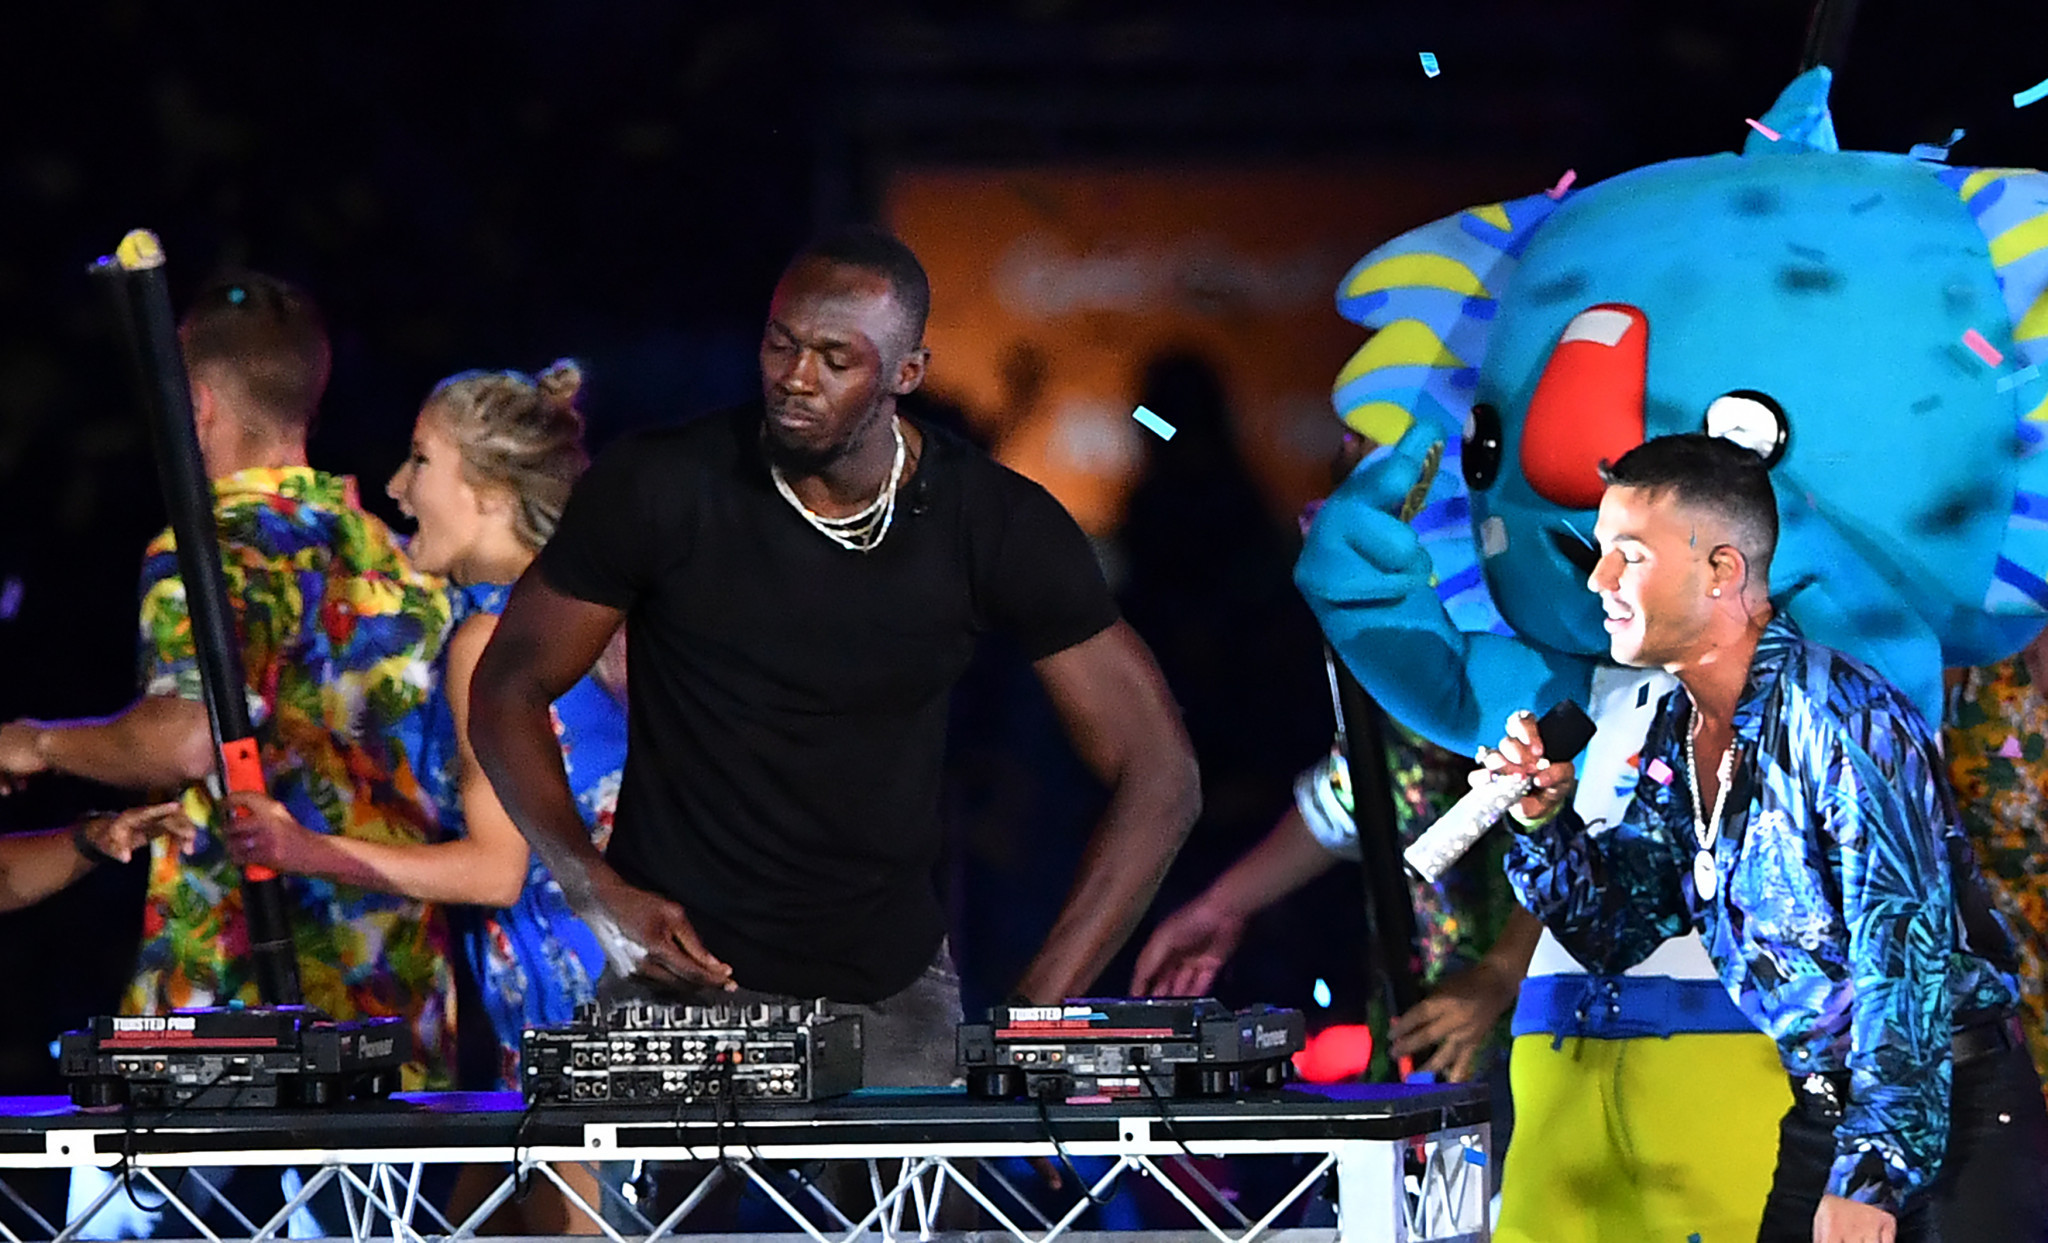 An appearance on the decks by Usain Bolt was a rare highlight of the Gold Coast 2018 Closing Ceremony which was a disappointment to many spectators and television viewers ©Getty Images